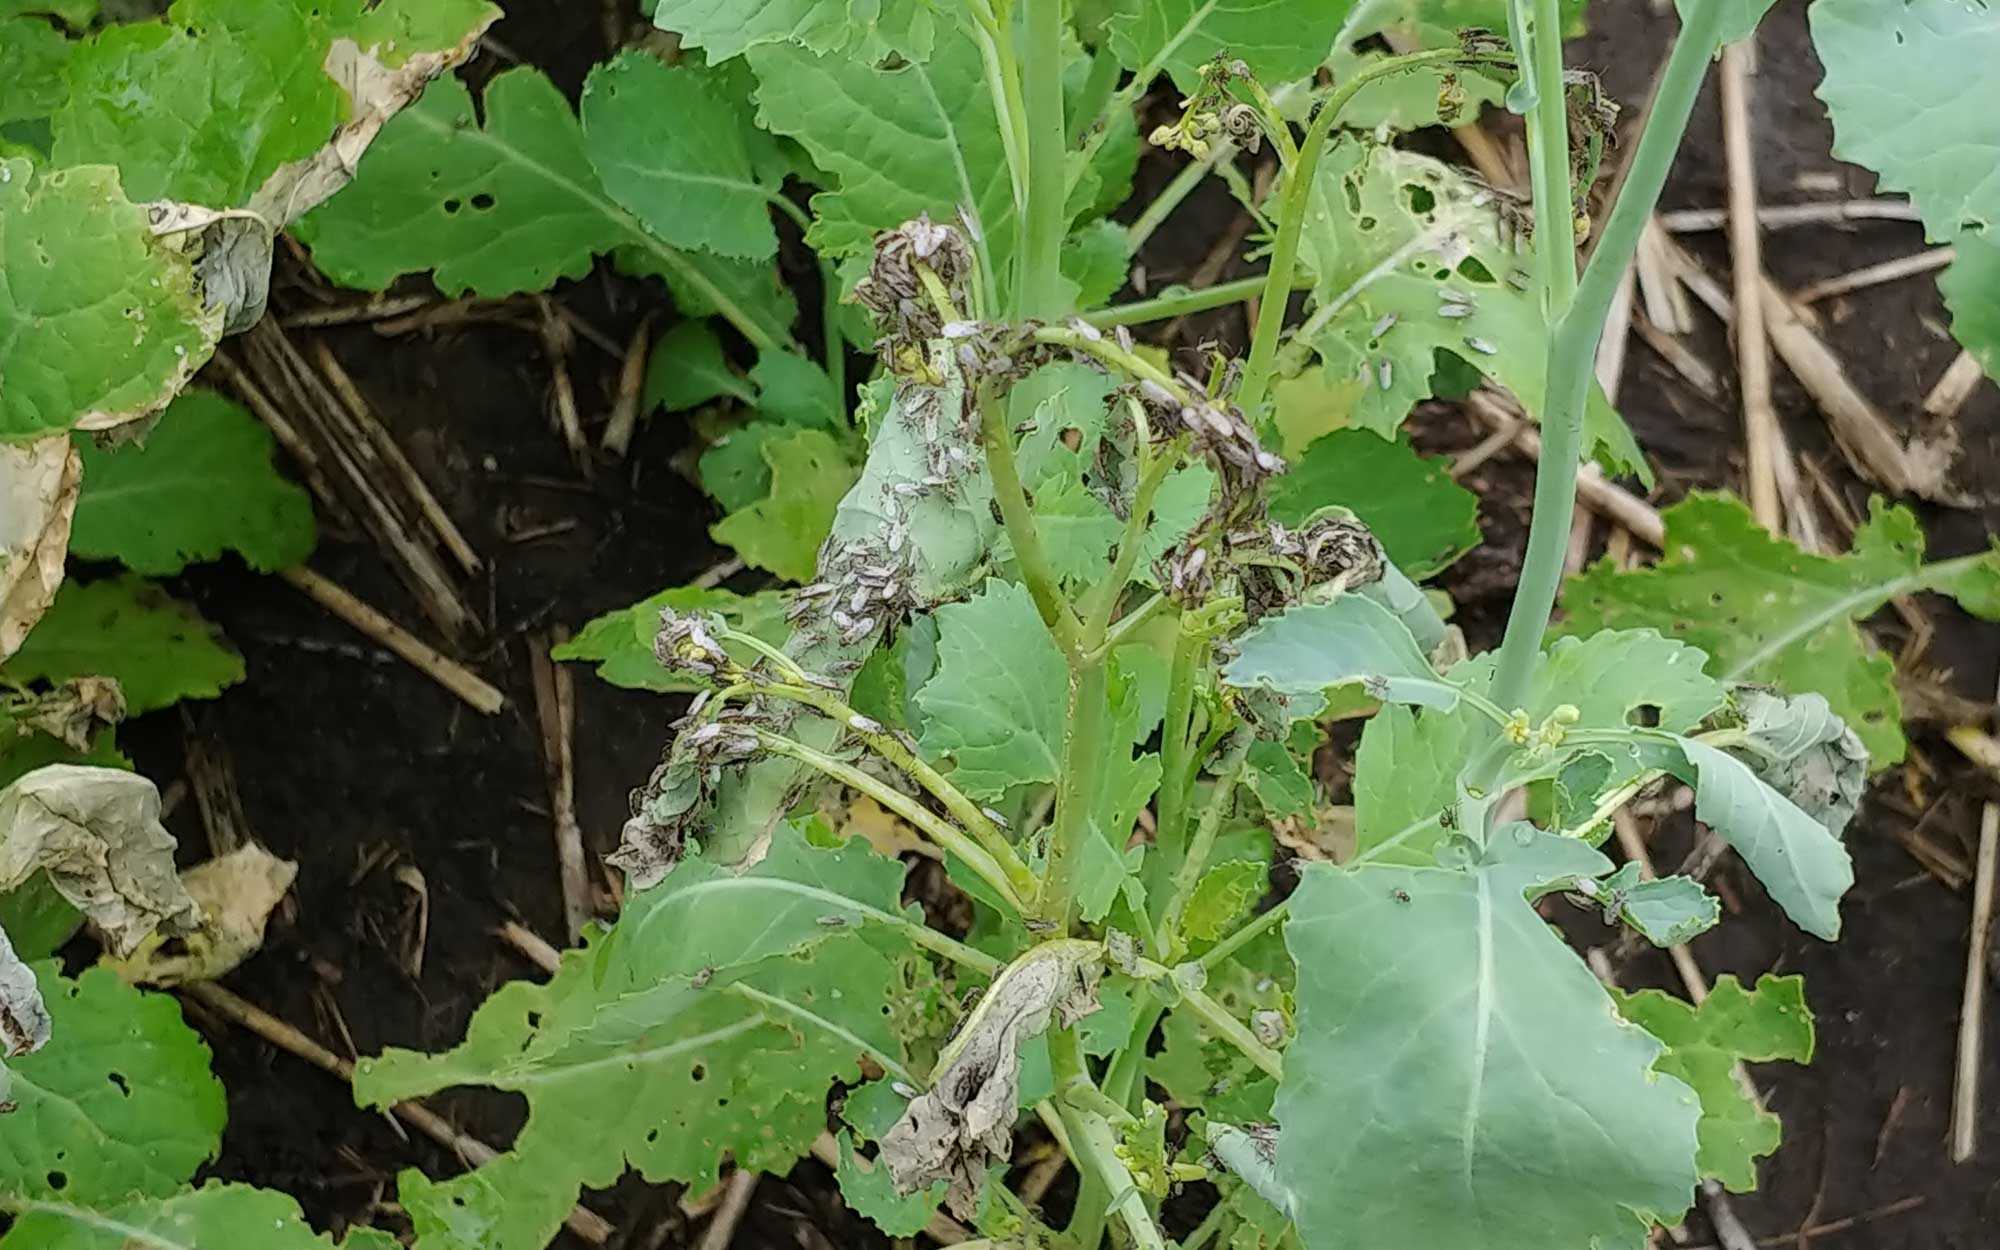 Green canola plants infested with false chinch bugs with dying leaves.